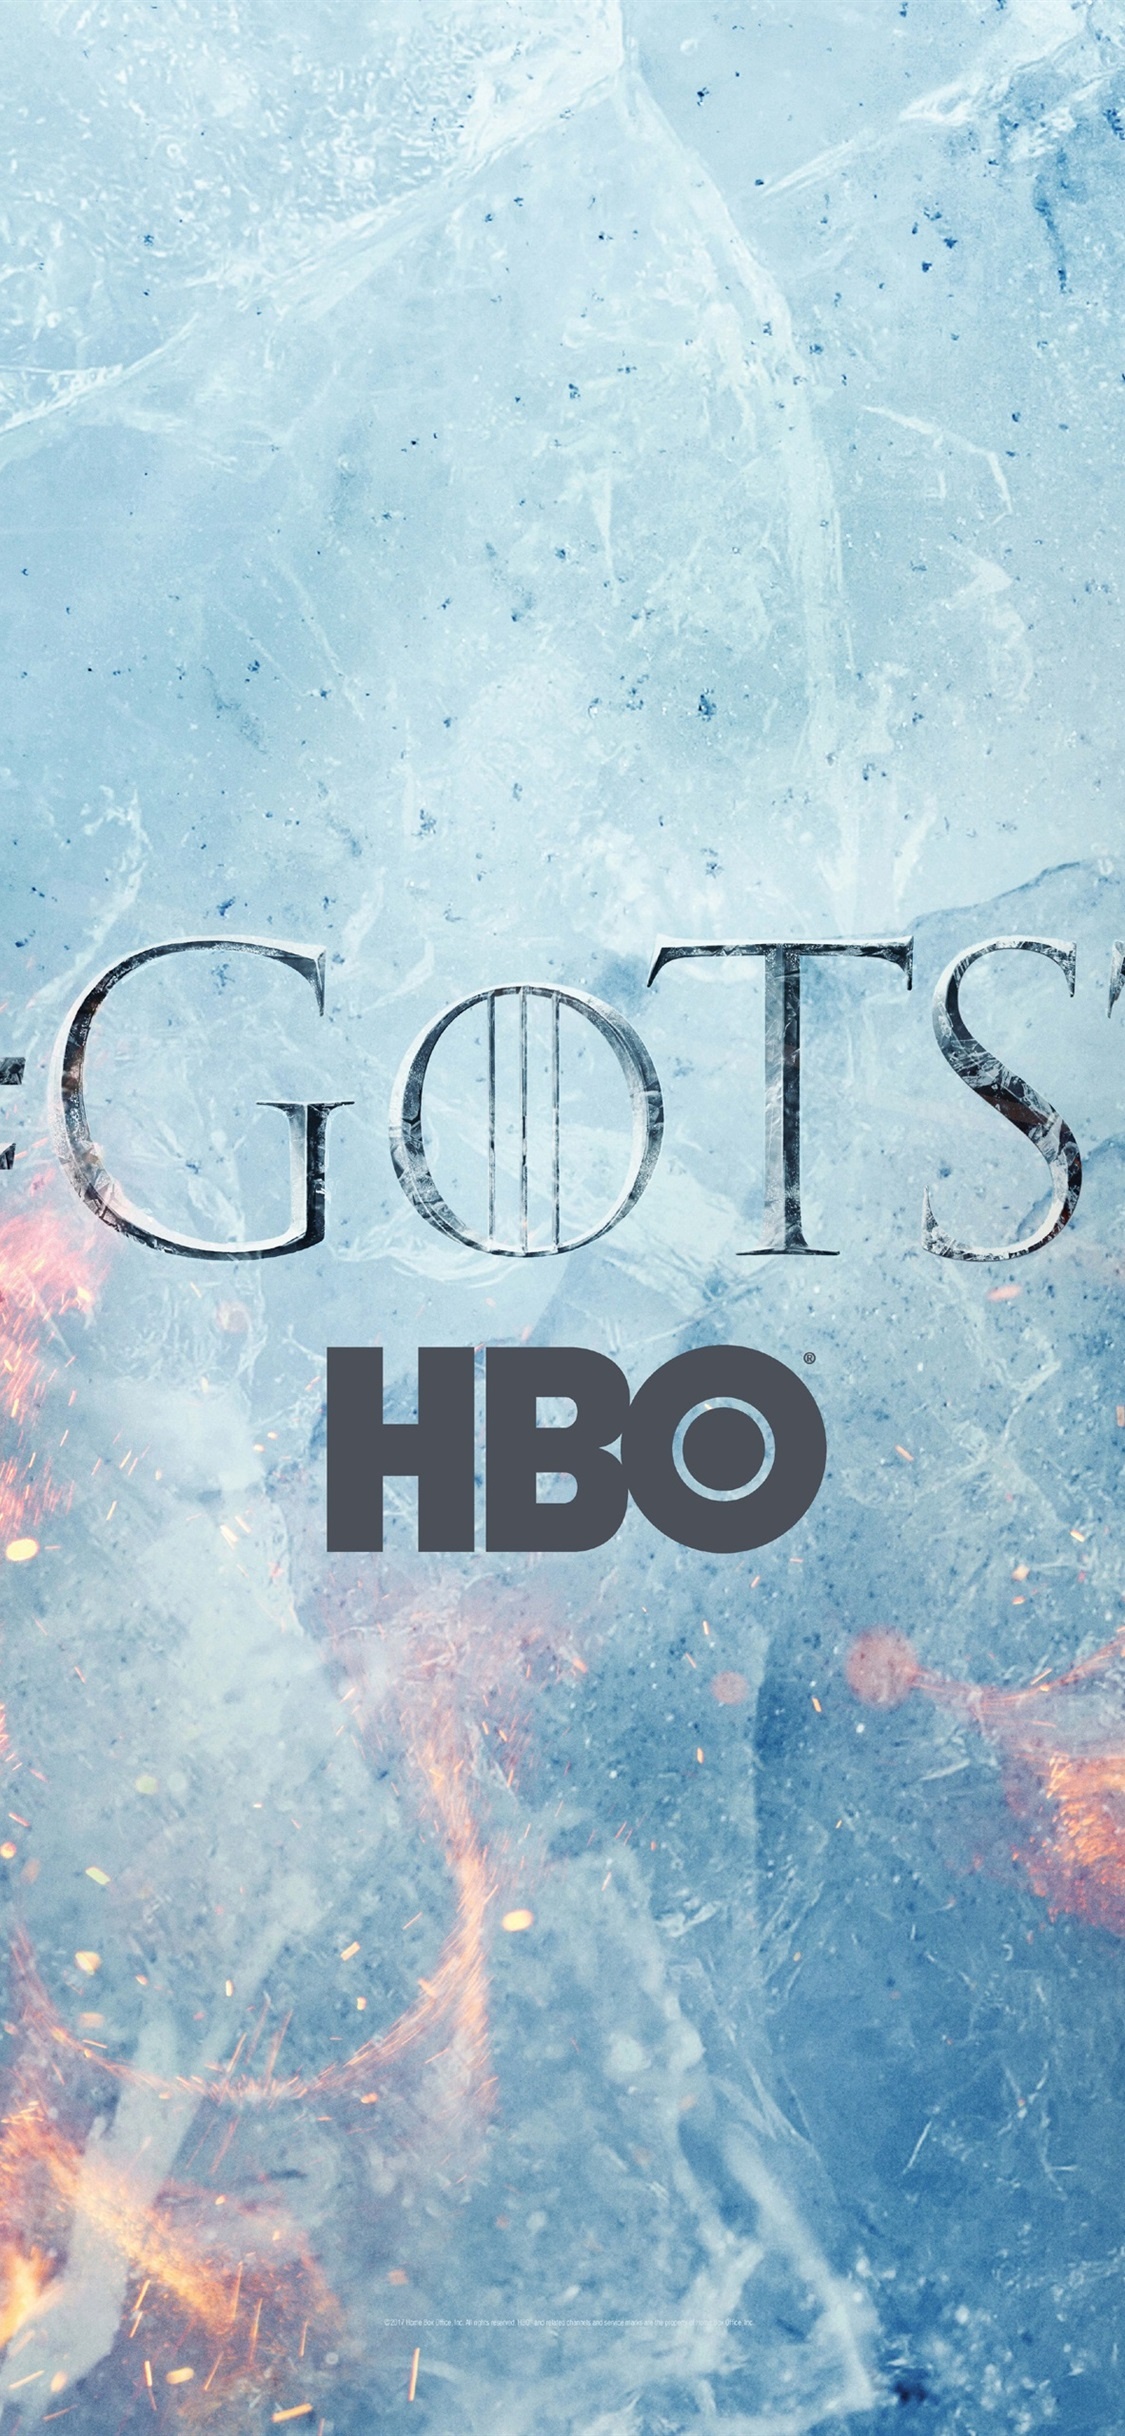 HBO: Game of Thrones, An American fantasy drama series, Created for Home Box Office. 1130x2440 HD Background.